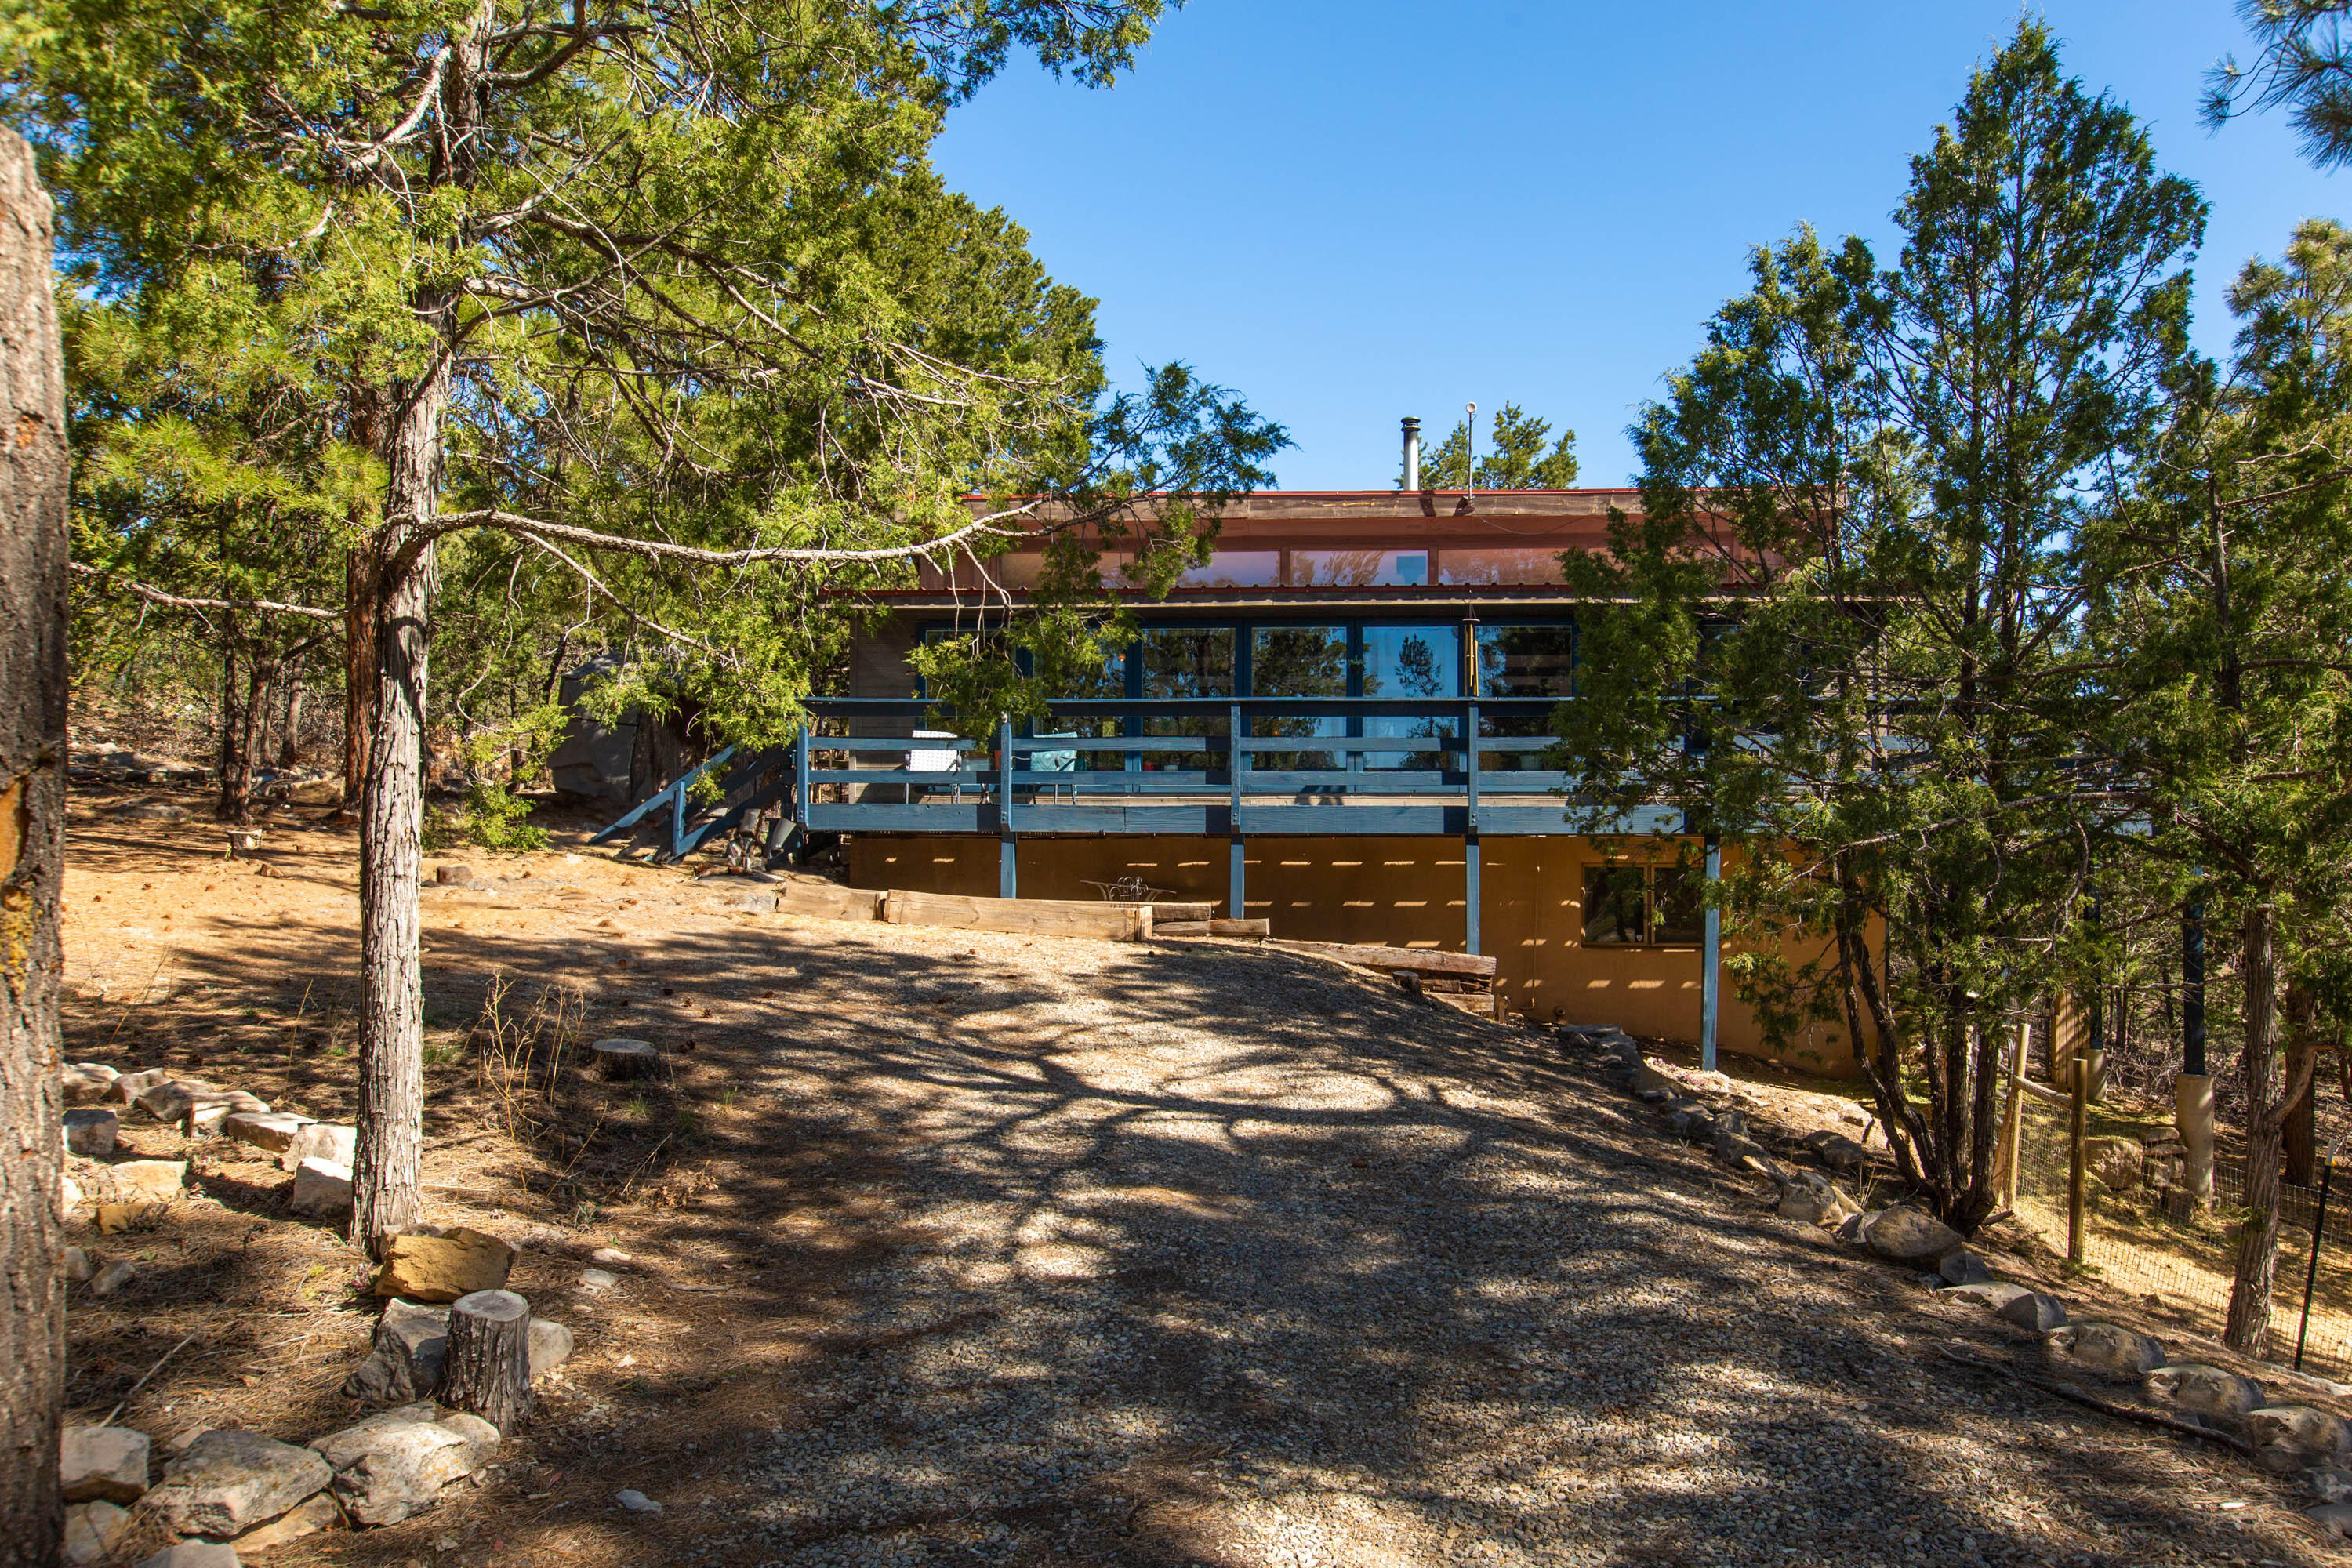 This private mountain retreat is located in Tijeras, just far enough from the city, but close enough to enjoy convenience. This charming and eclectic home features 2 living areas, a cozy wood burning stove, and unique fireplace to enjoy on winter days! The .5 acre lot is ready for your furry or feathery friends, with a  chicken coop ready for your flock! Passive solar, charming brick floors and walls, high ceilings, a large deck to enjoy the mountain air, and light and cheery home. Property requires hauled water, on owned propane, and septic. Contact your favorite realtor for a showing today!